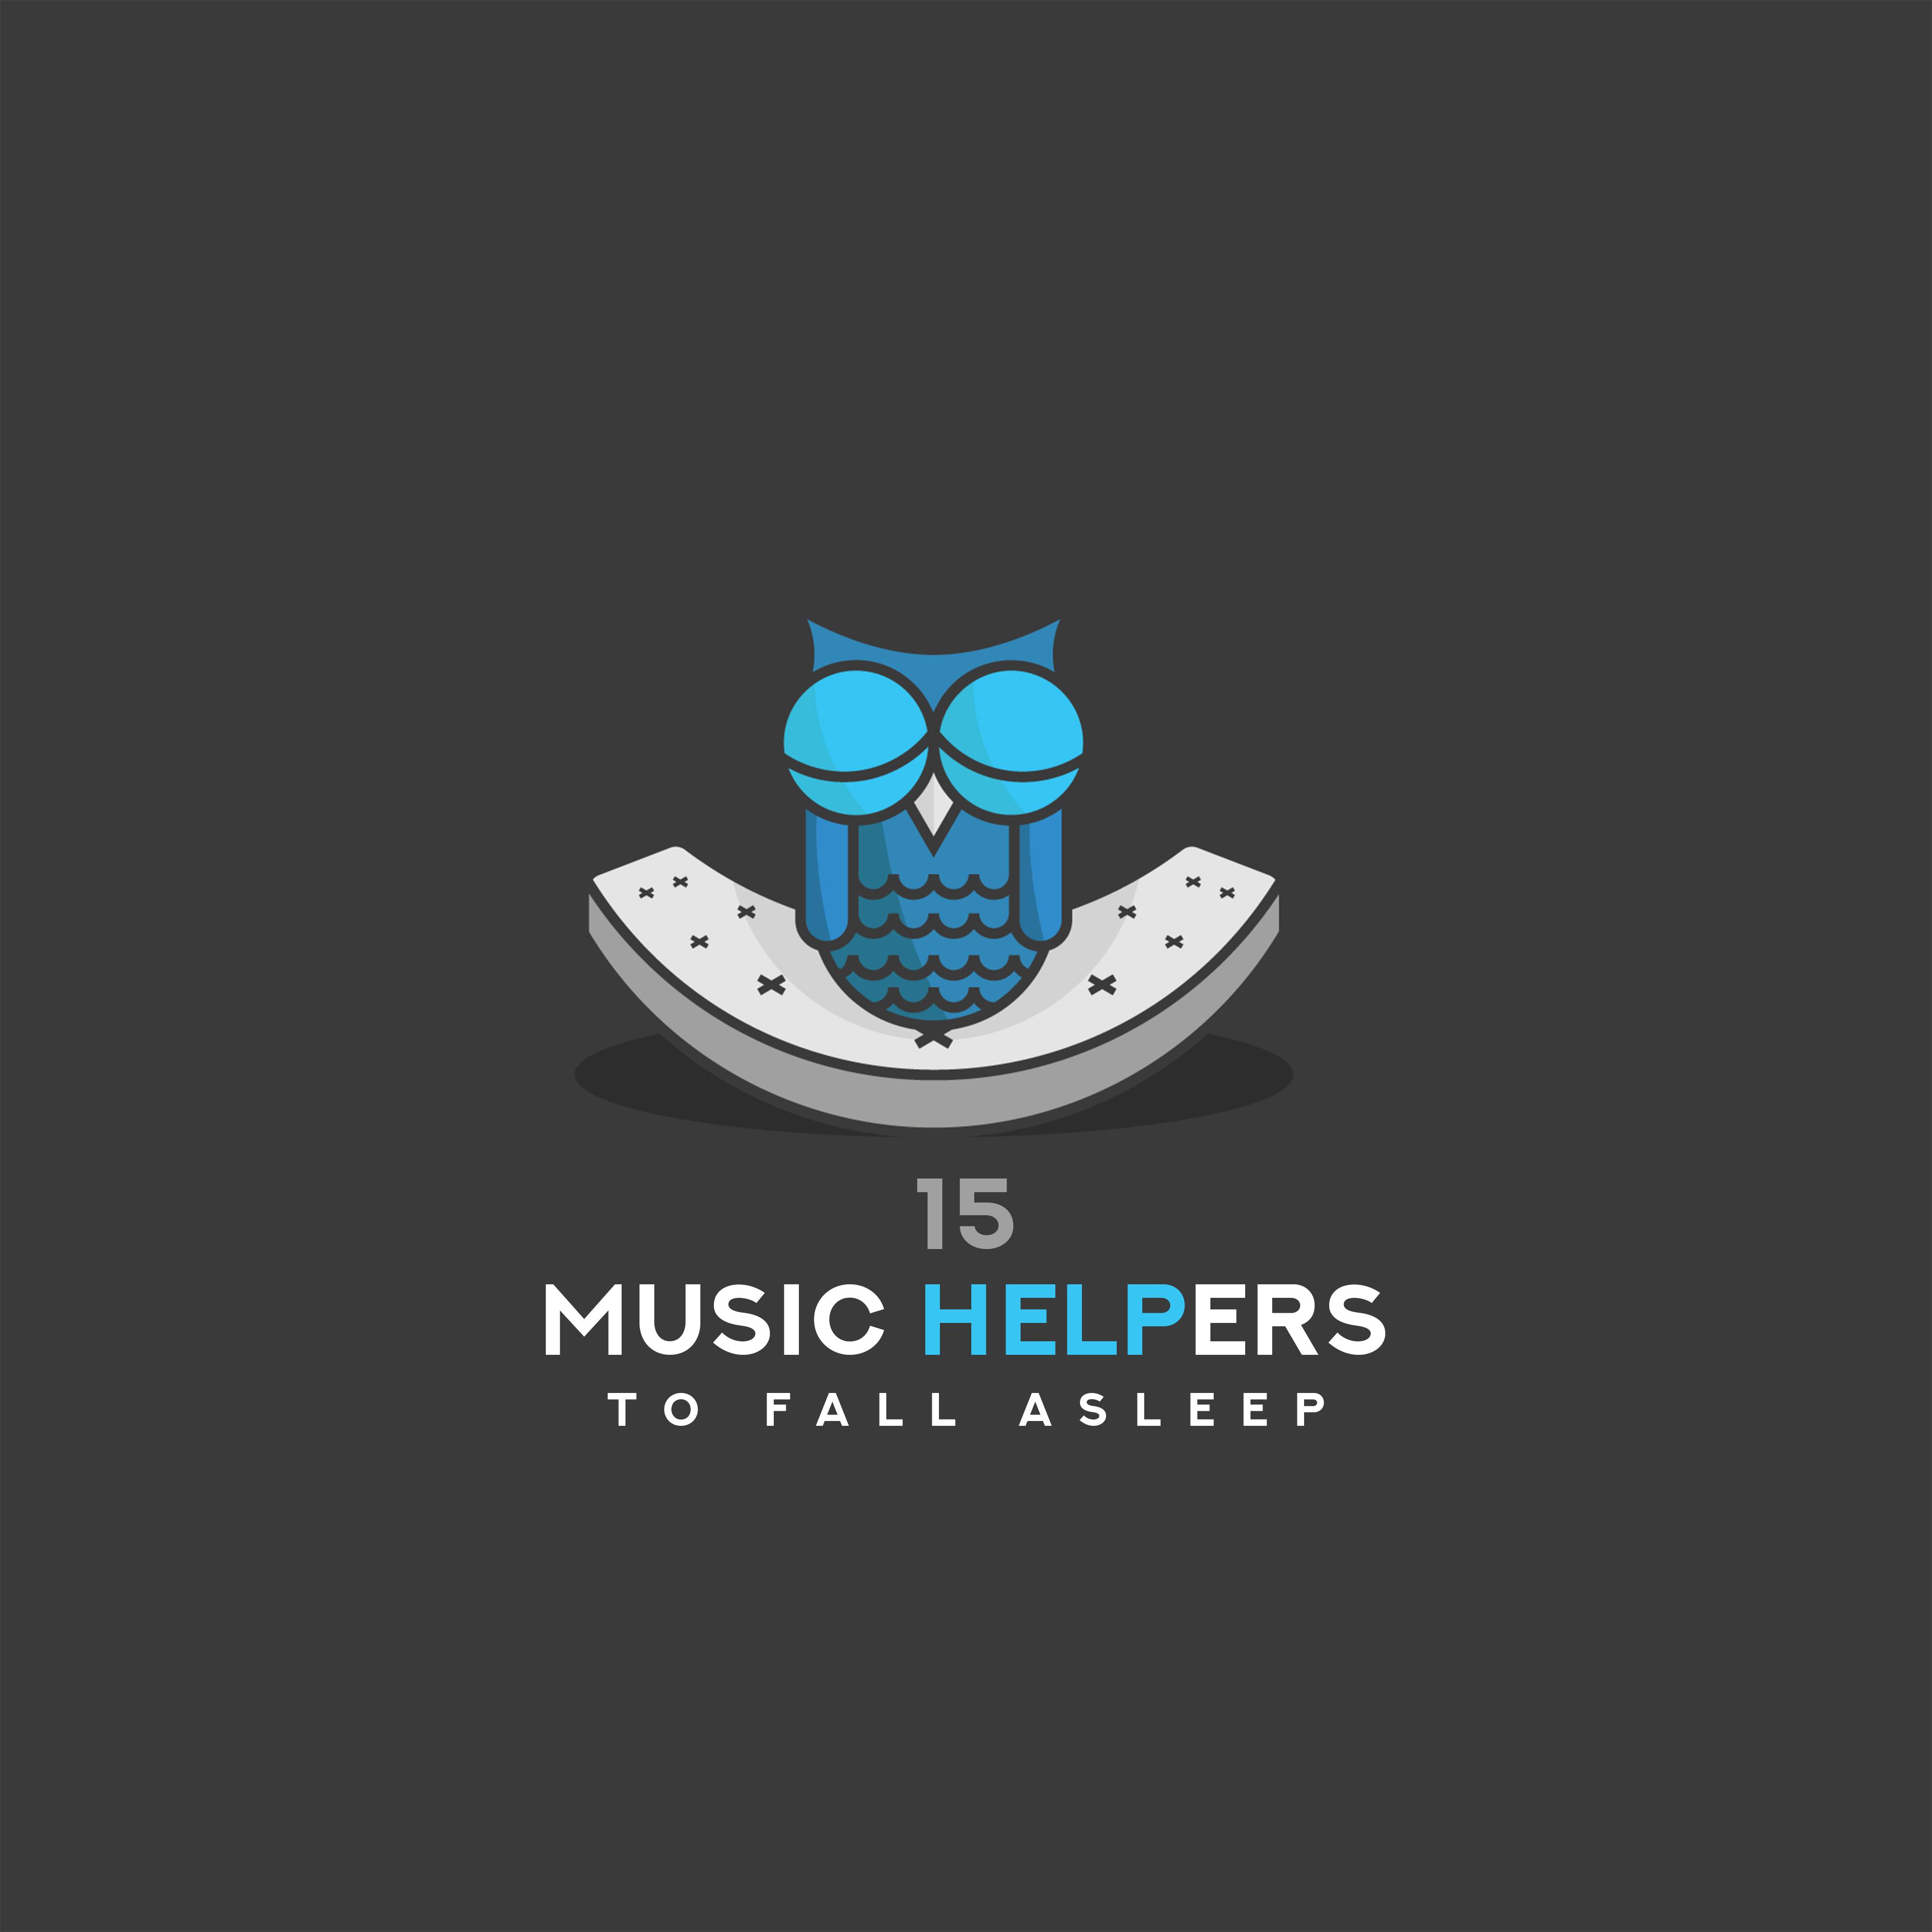 15 Music Helpers to Fall Asleep: 2019 New Age Delicate Music for Best Before Sleep Relaxation, Cure Insomnia, Calm & Rest